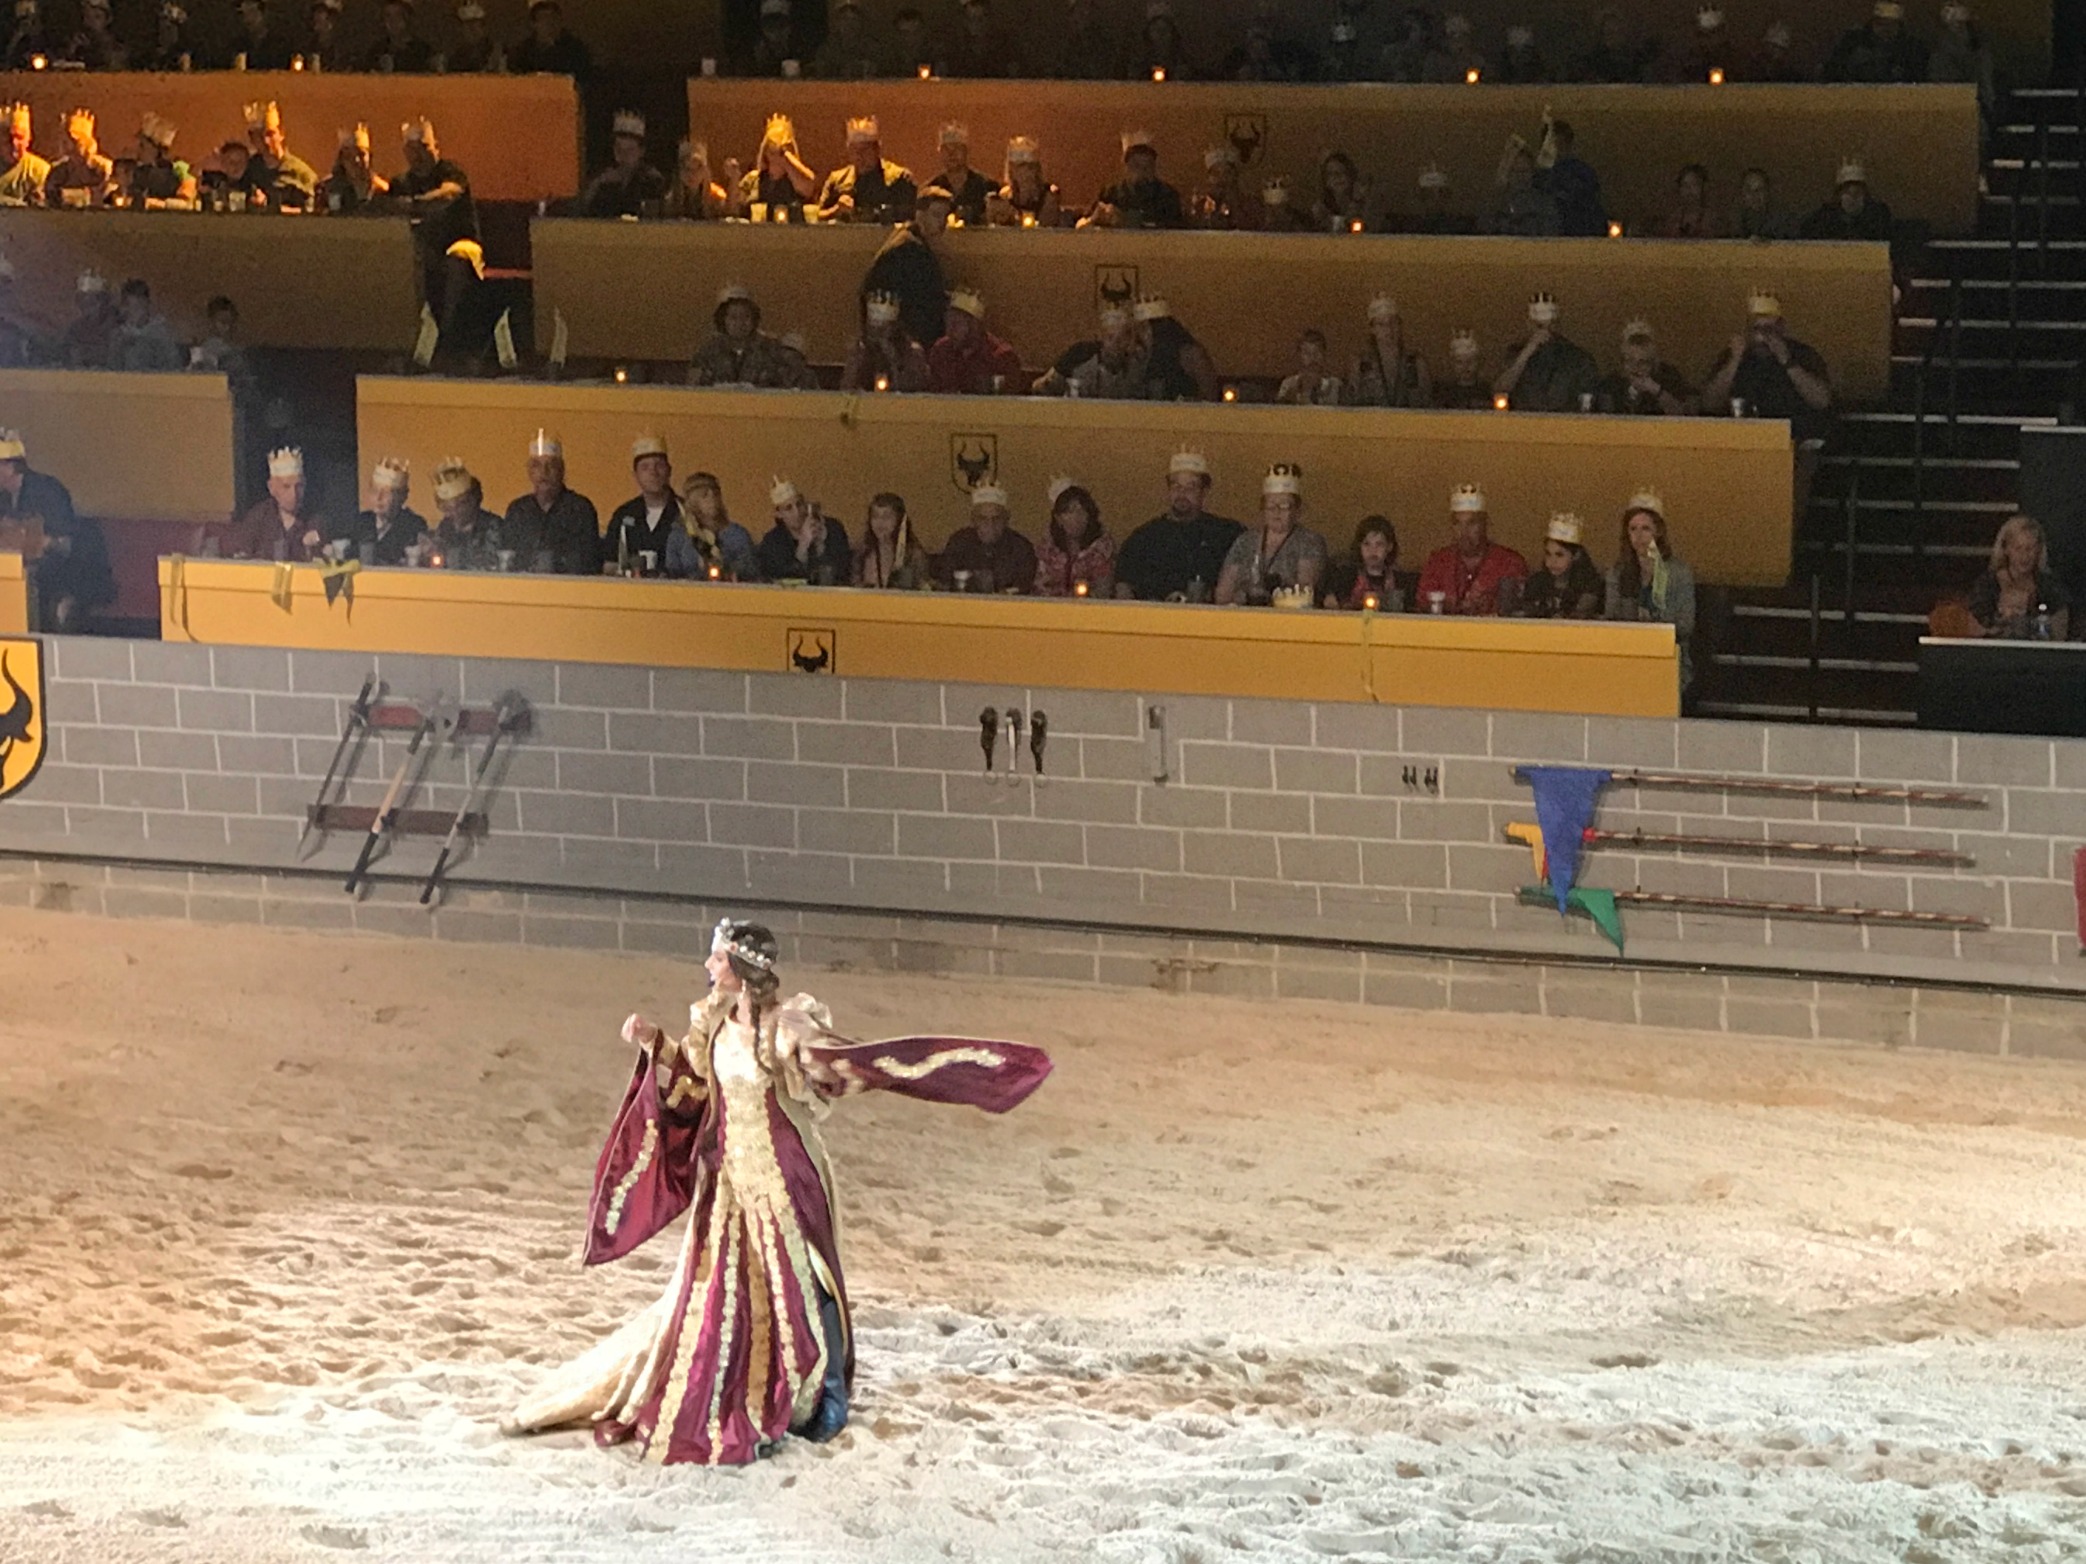 There’s a New Ruler at Medieval Times Orlando, The Queen!